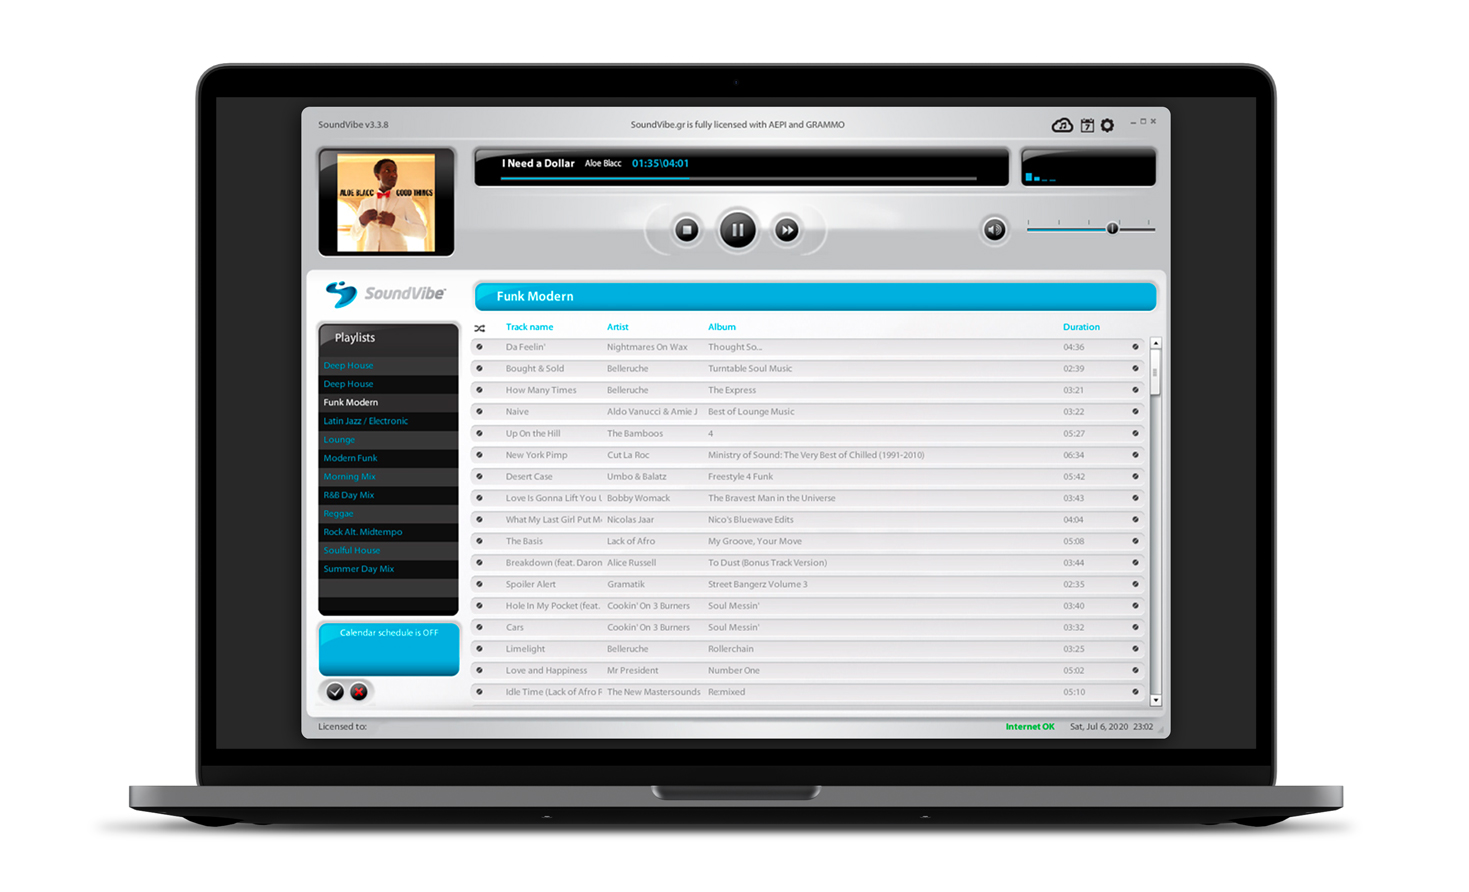 The main user screen of the SoundVibe application MUSIC SOFTWARE